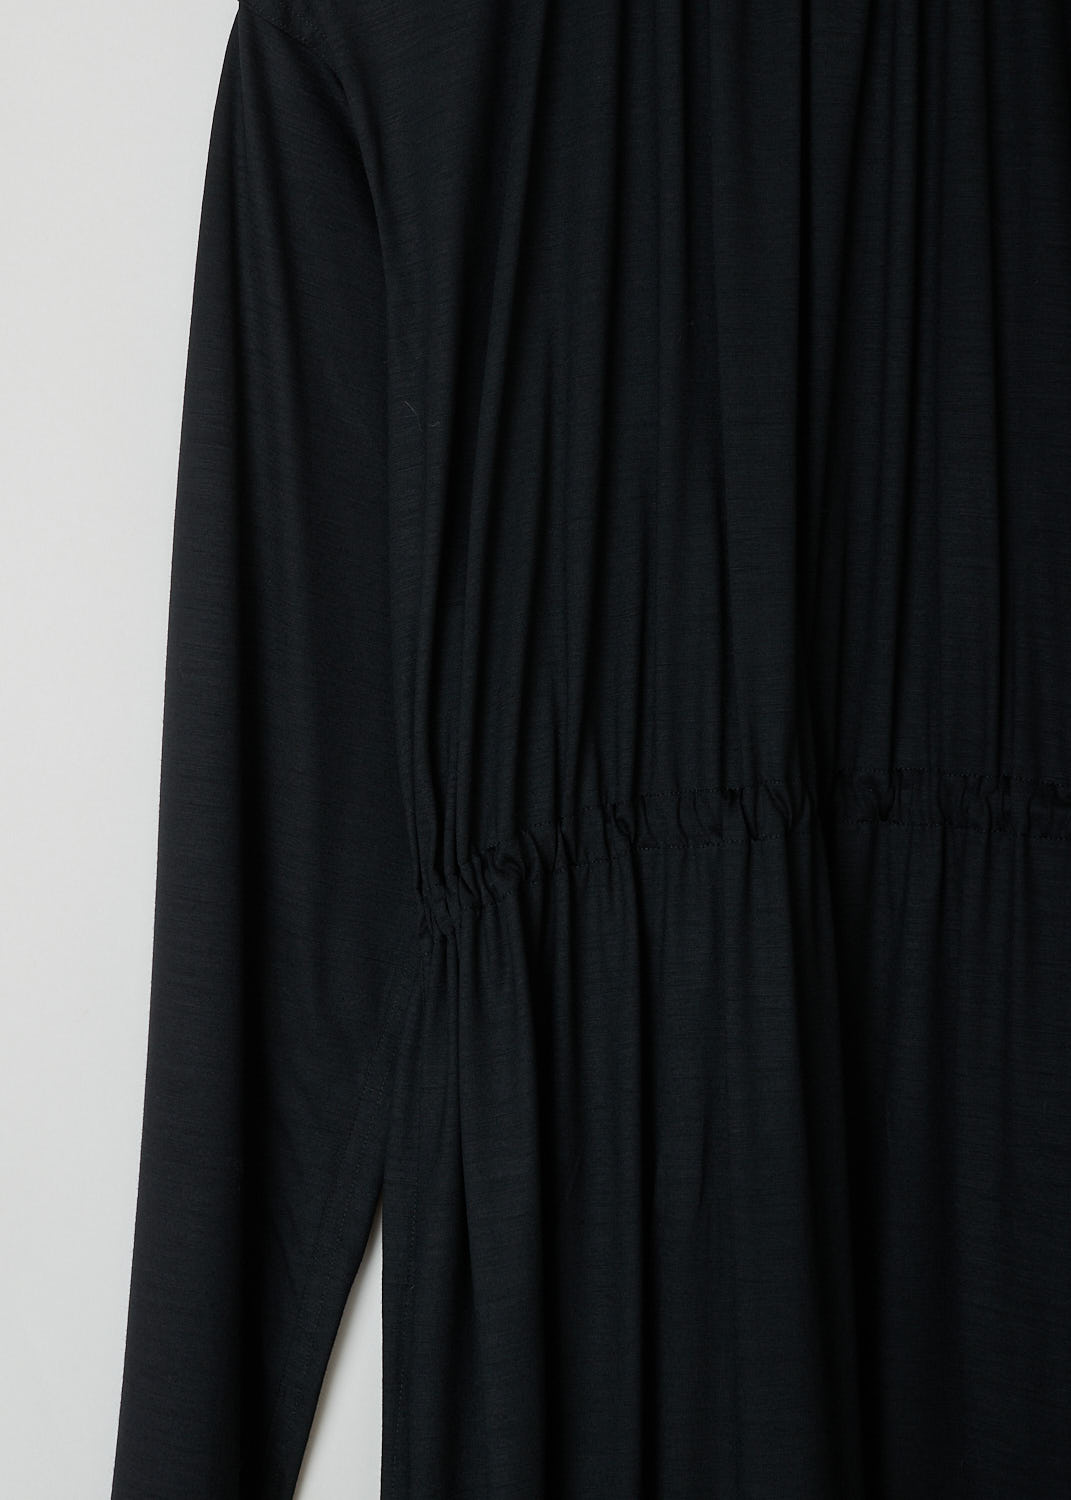 SOFIE Dâ€™HOORE, LONG SLEEVE BLACK DRESS, DARA_WOJE_BLACK, Black, Detail, This black maxi dress features a gathered elasticated neckline. The waist is also elasticated, cinching in the waist. Slant pockets can be found concealed in the seam.
